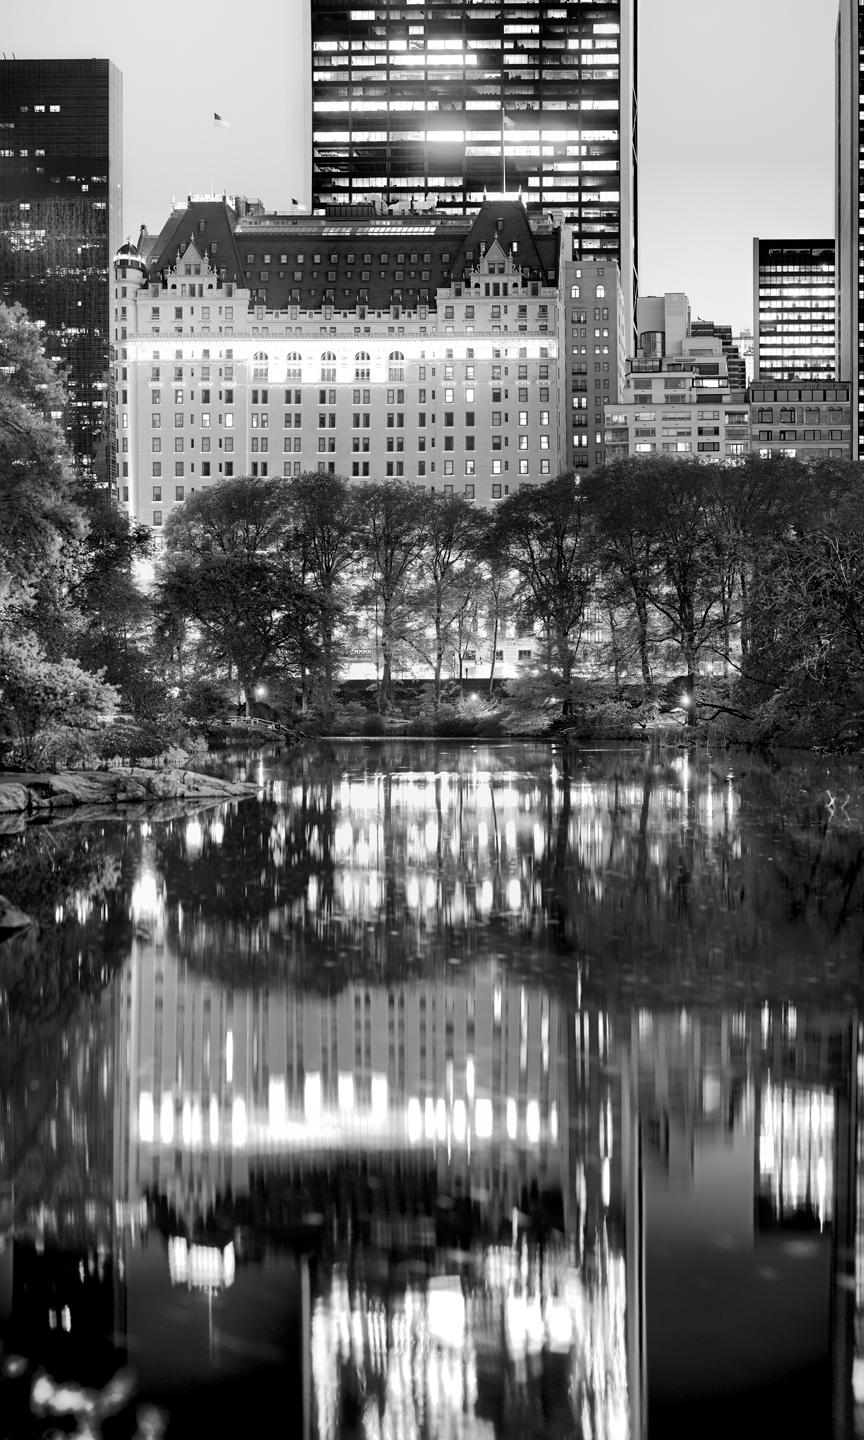 Jeff Chien-Hsing Liao Landscape Photograph - Central Park, New York City Black and White Photograph, Pond and Reflection